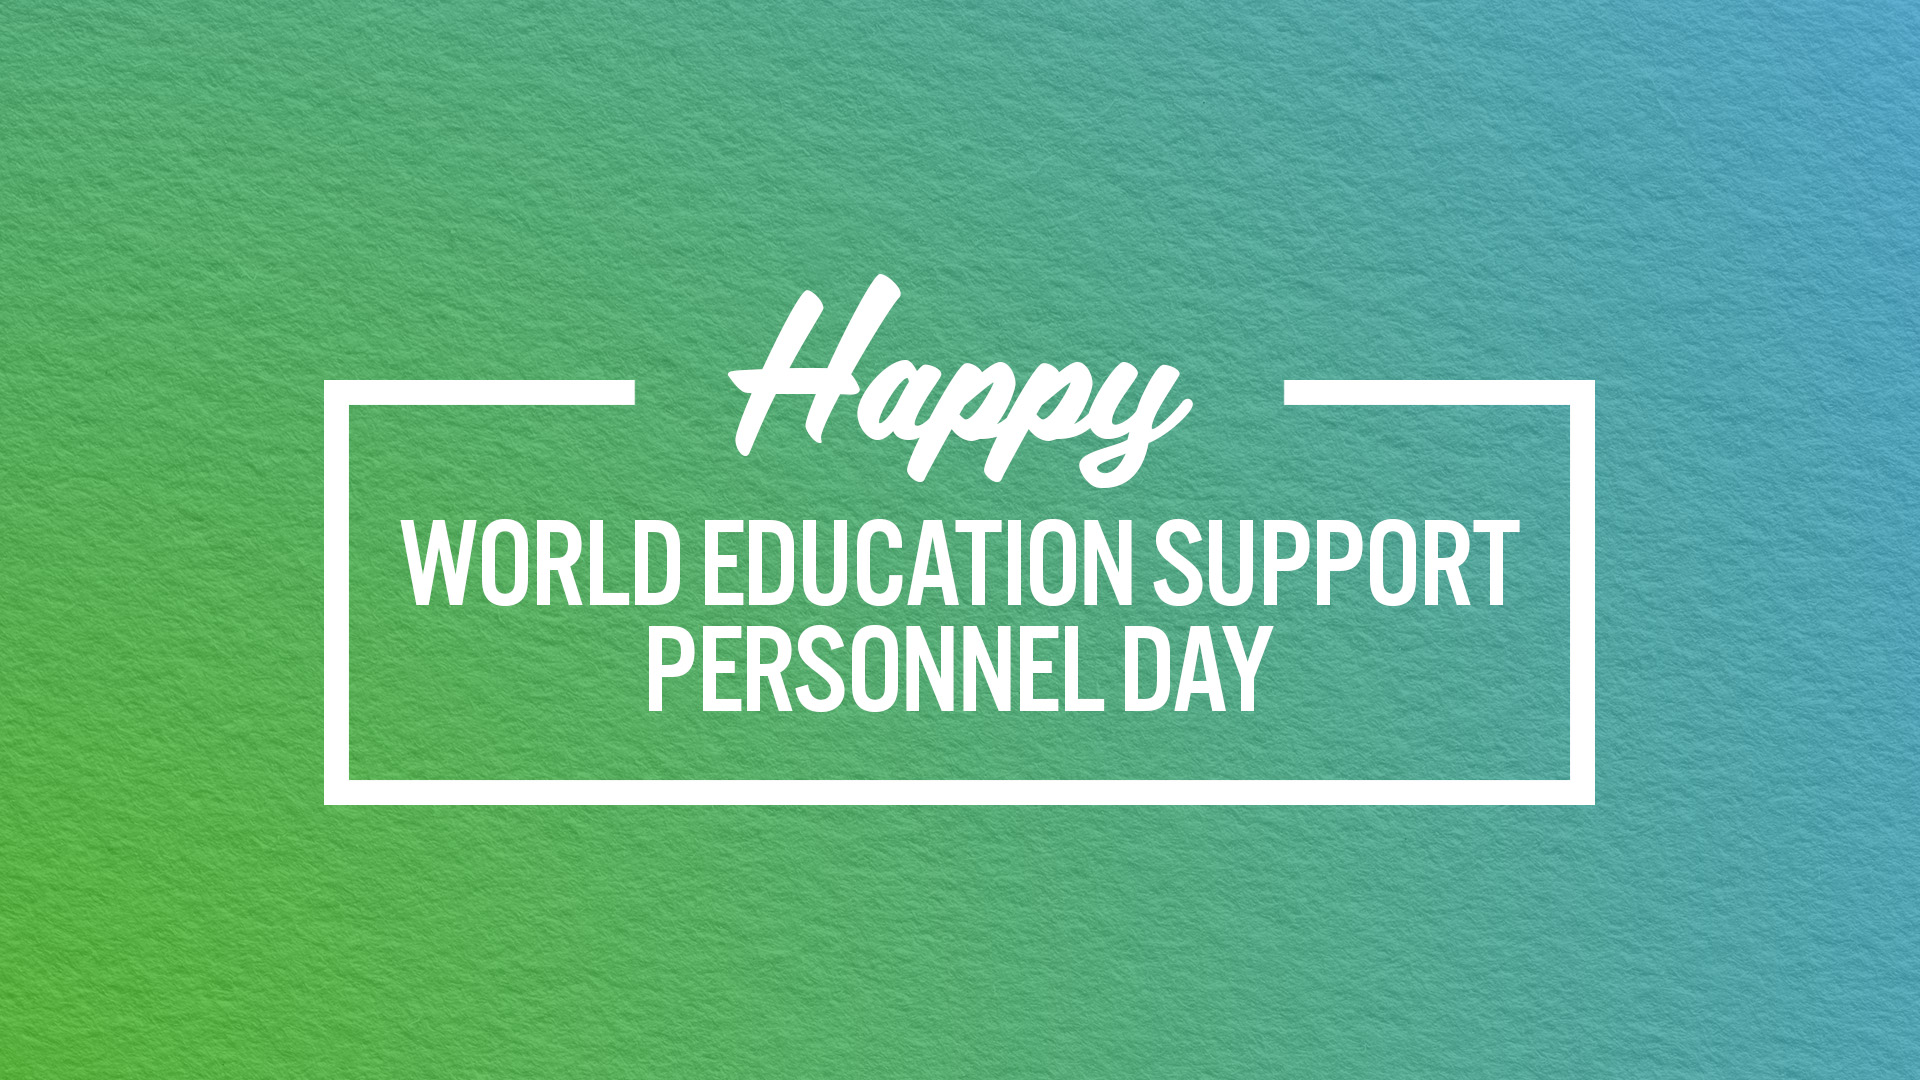 World Education Support Personnel Day